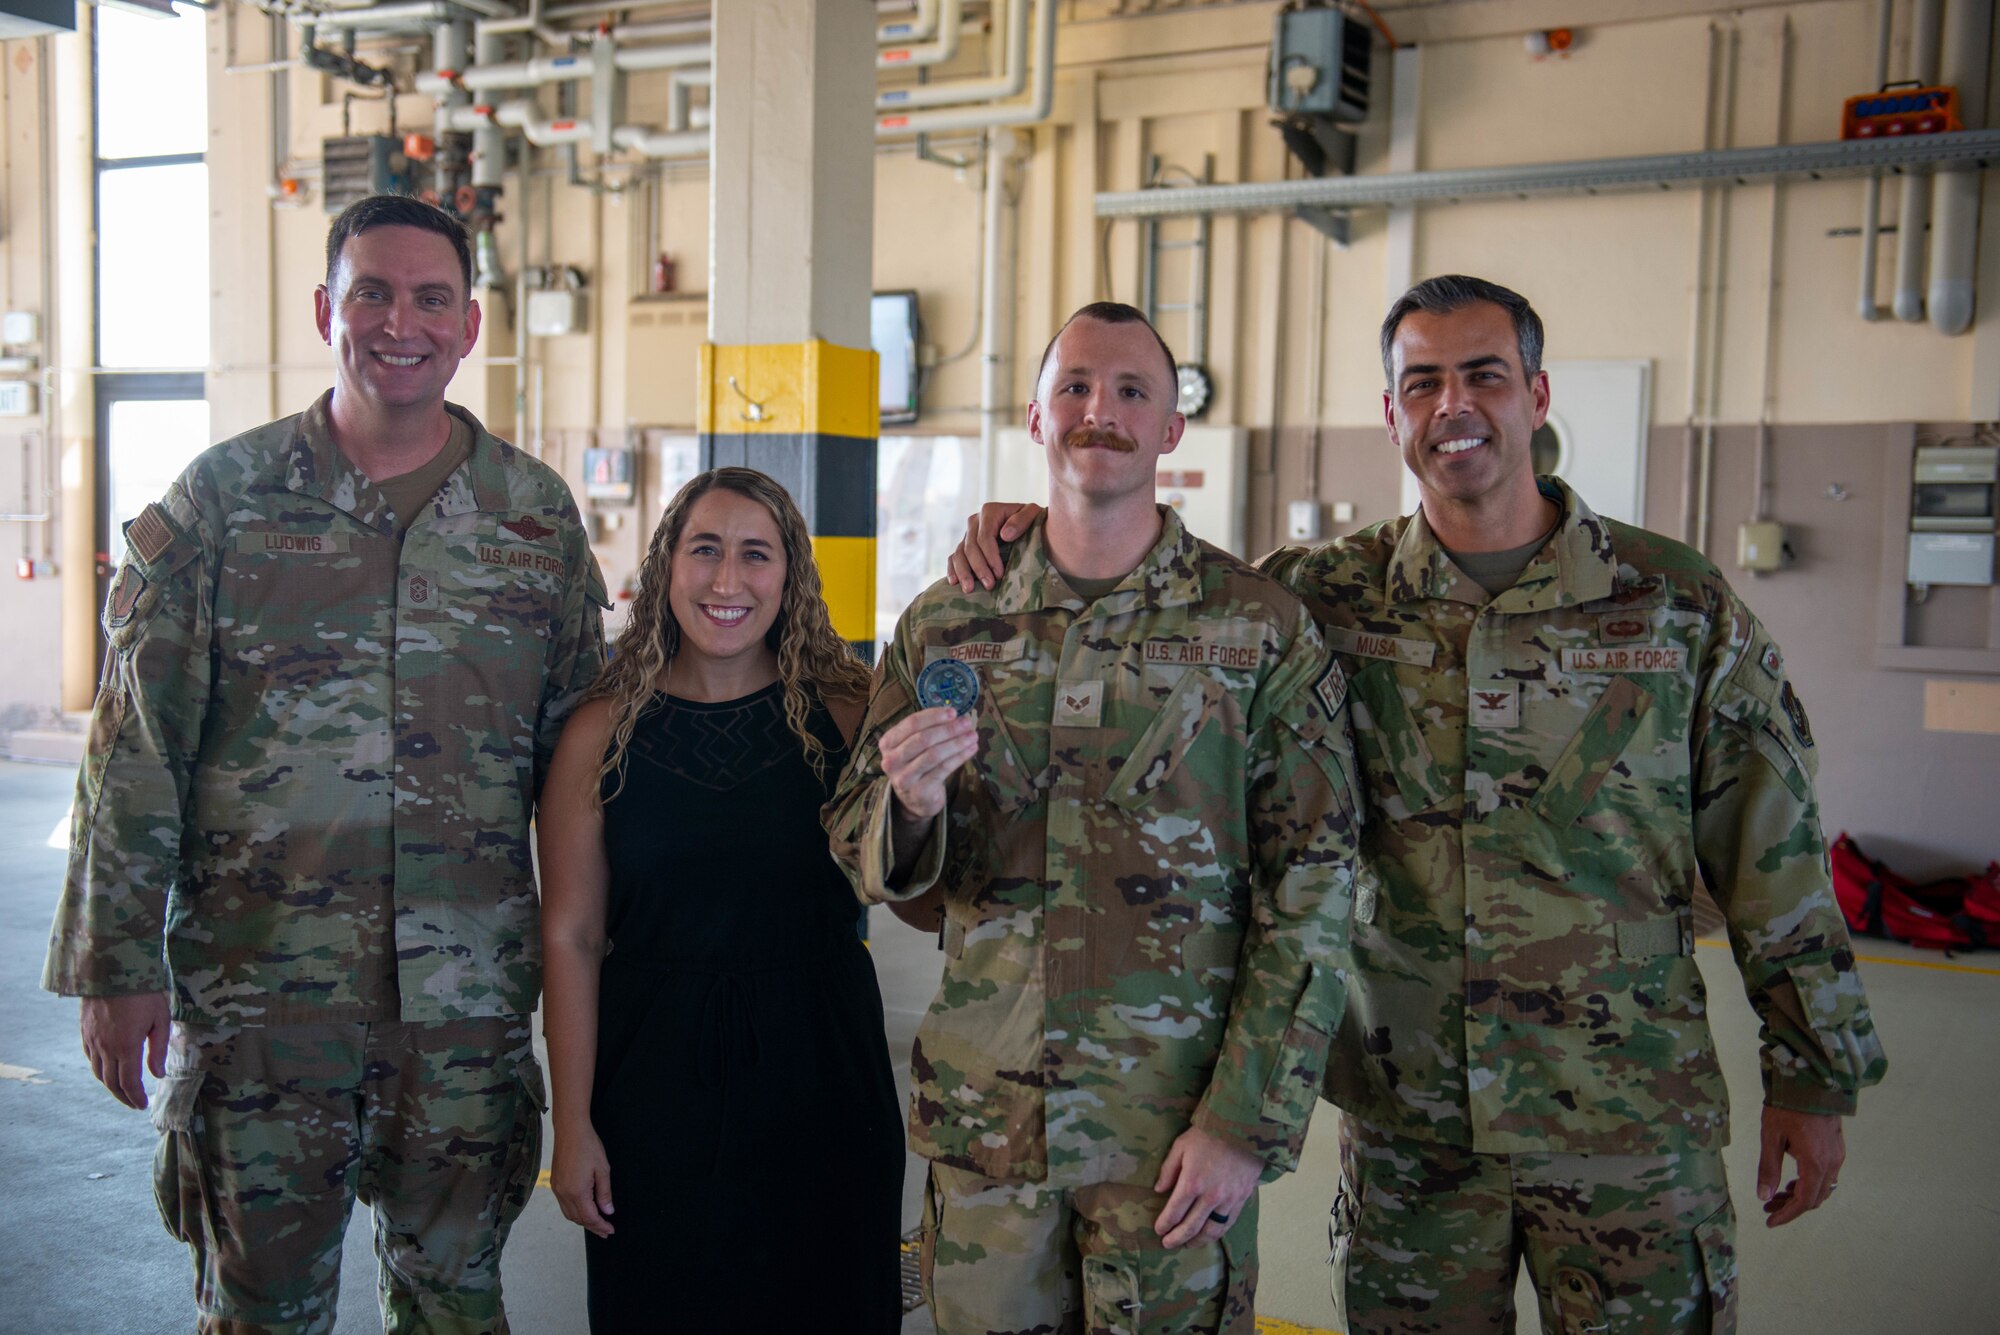 Senior Airman Collin Renner stands with his wife and 86th Airlift Wing leadership after being named Airlifter of the Week